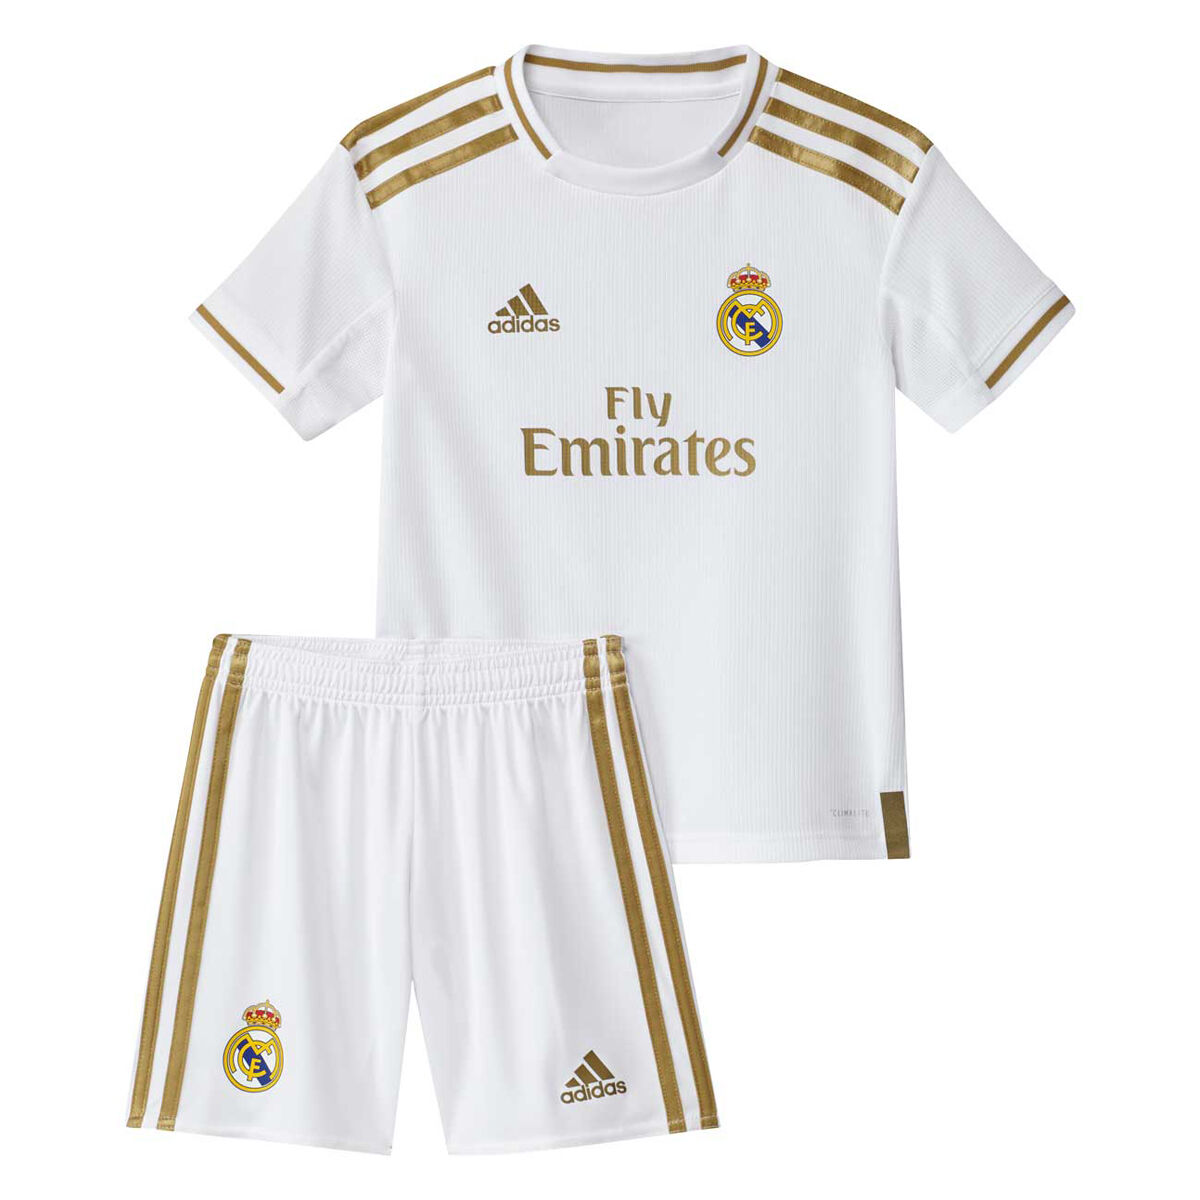 real madrid jersey white gold